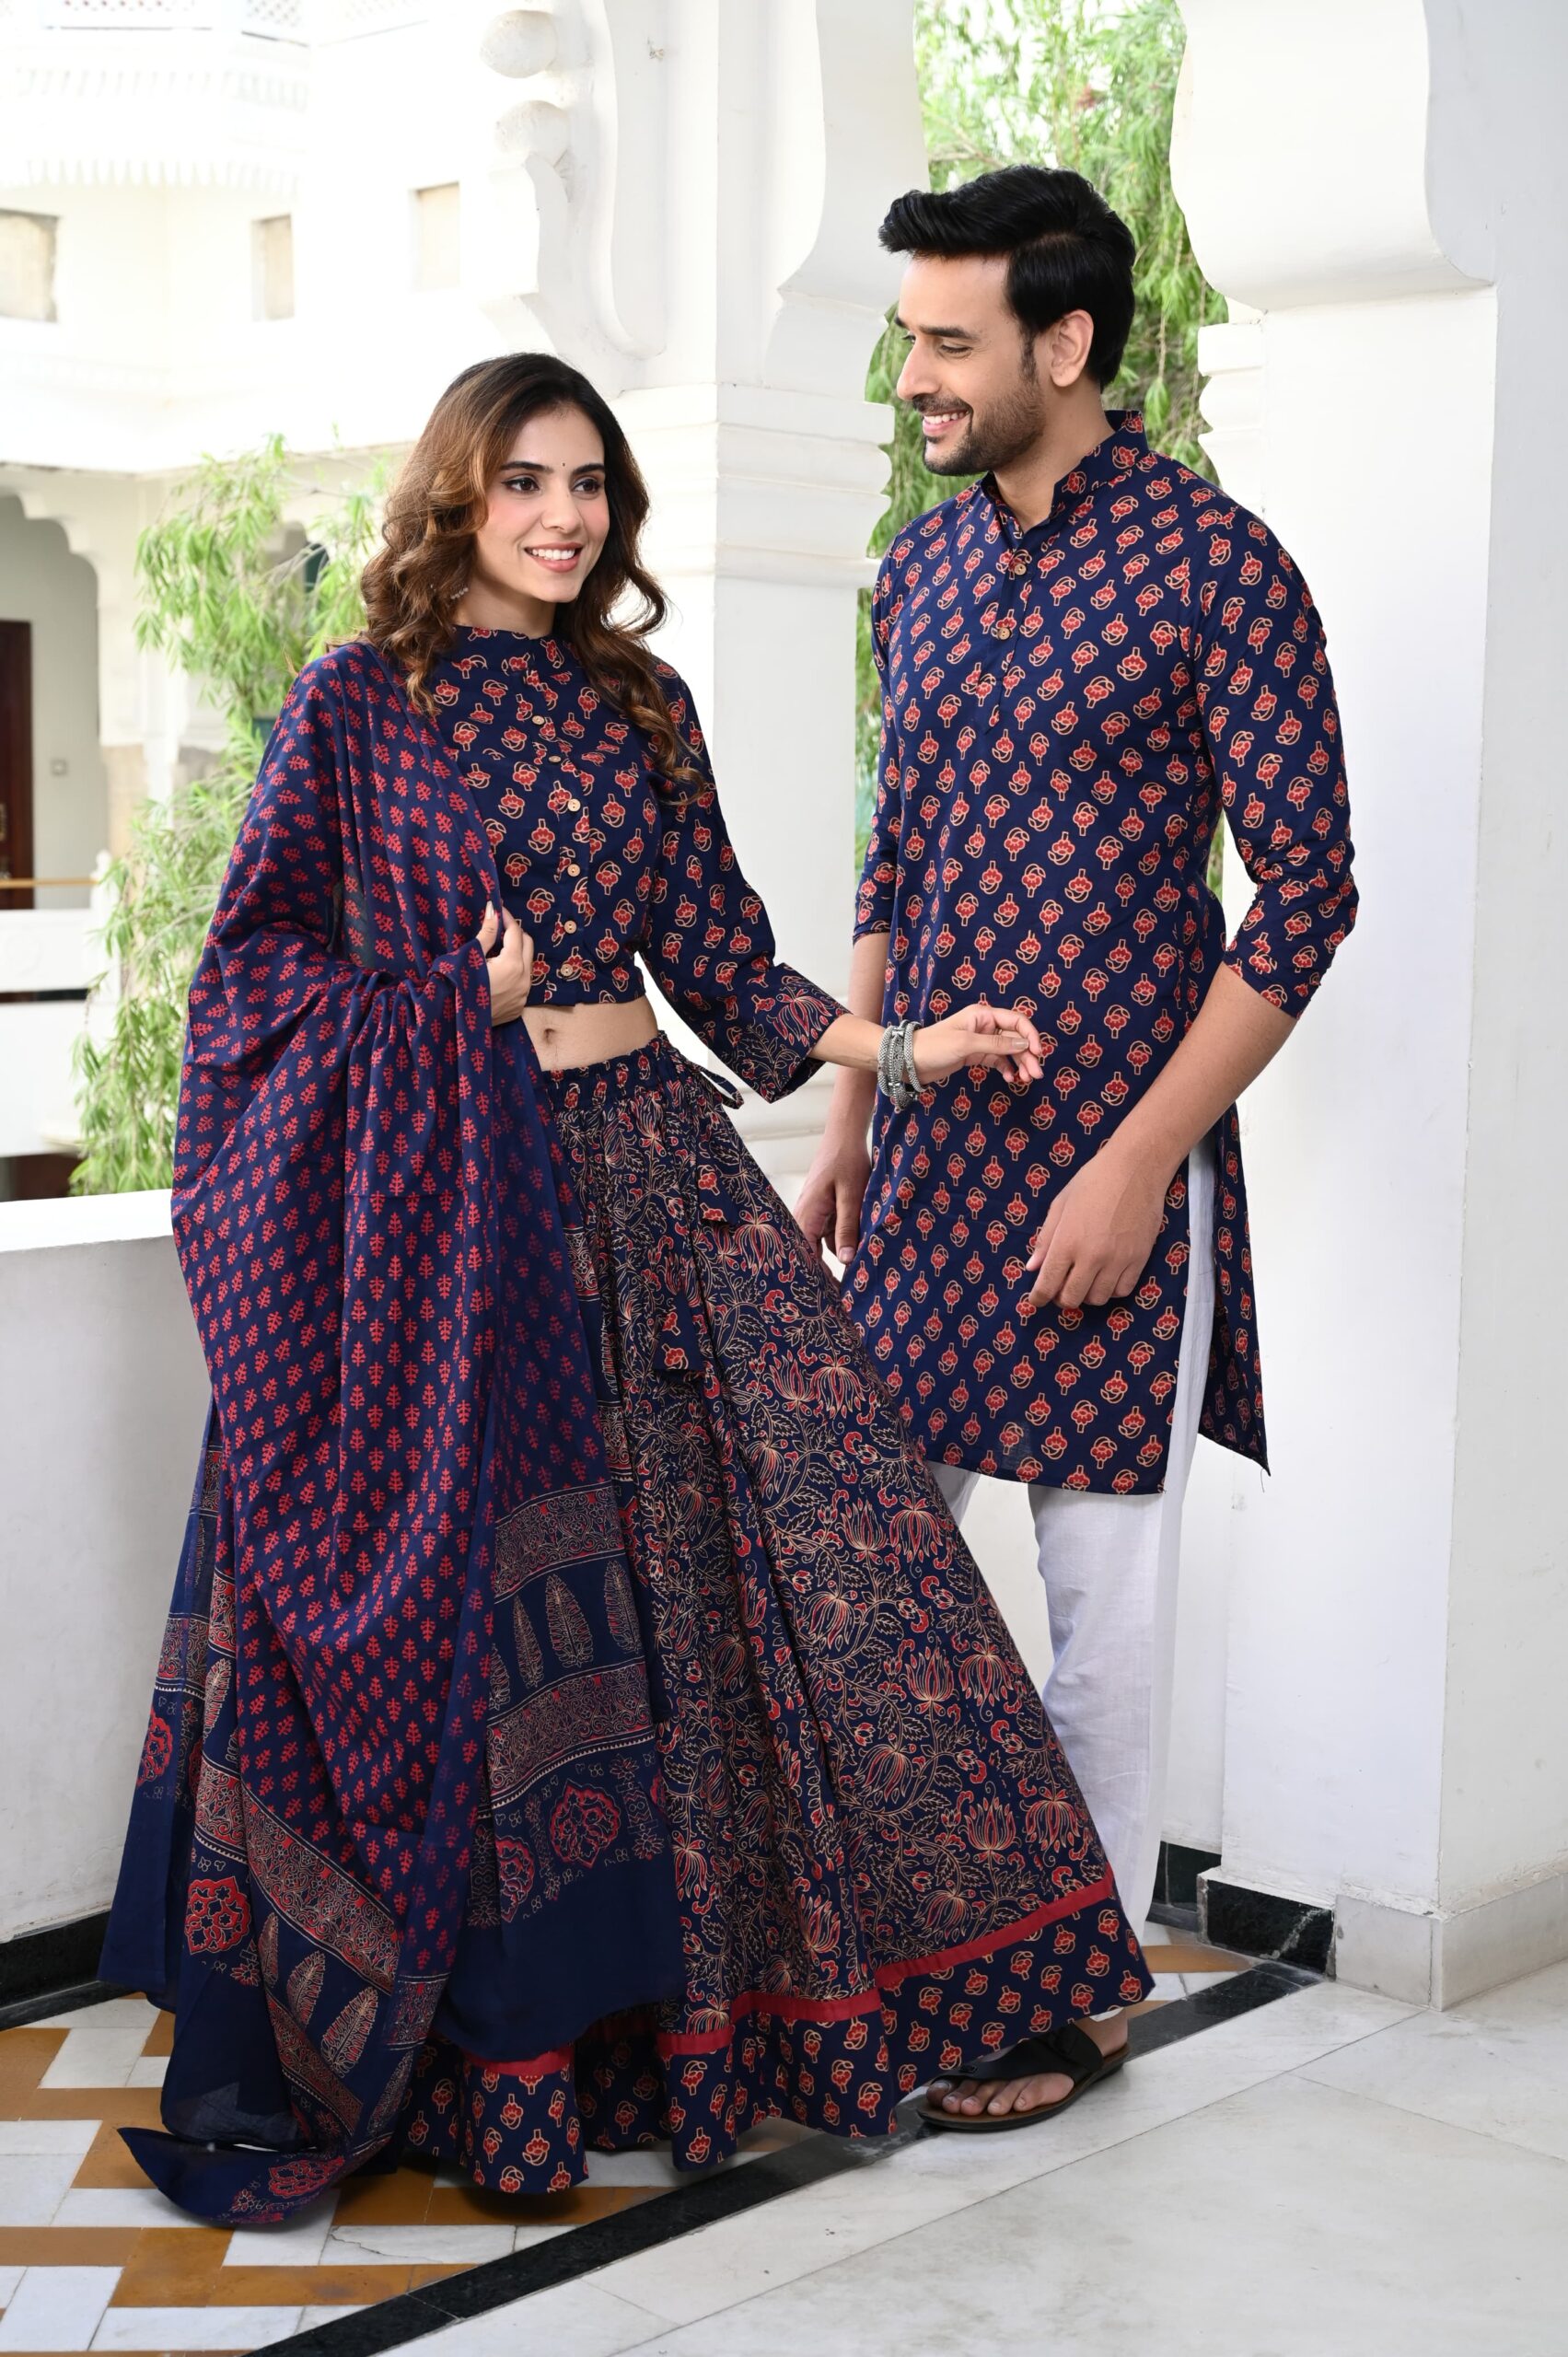 Latest 50 Long Kurta With Skirt Designs and Patterns 2022 - Tips and Beauty  | Long skirt top designs, Skirt design, Long kurti with skirt